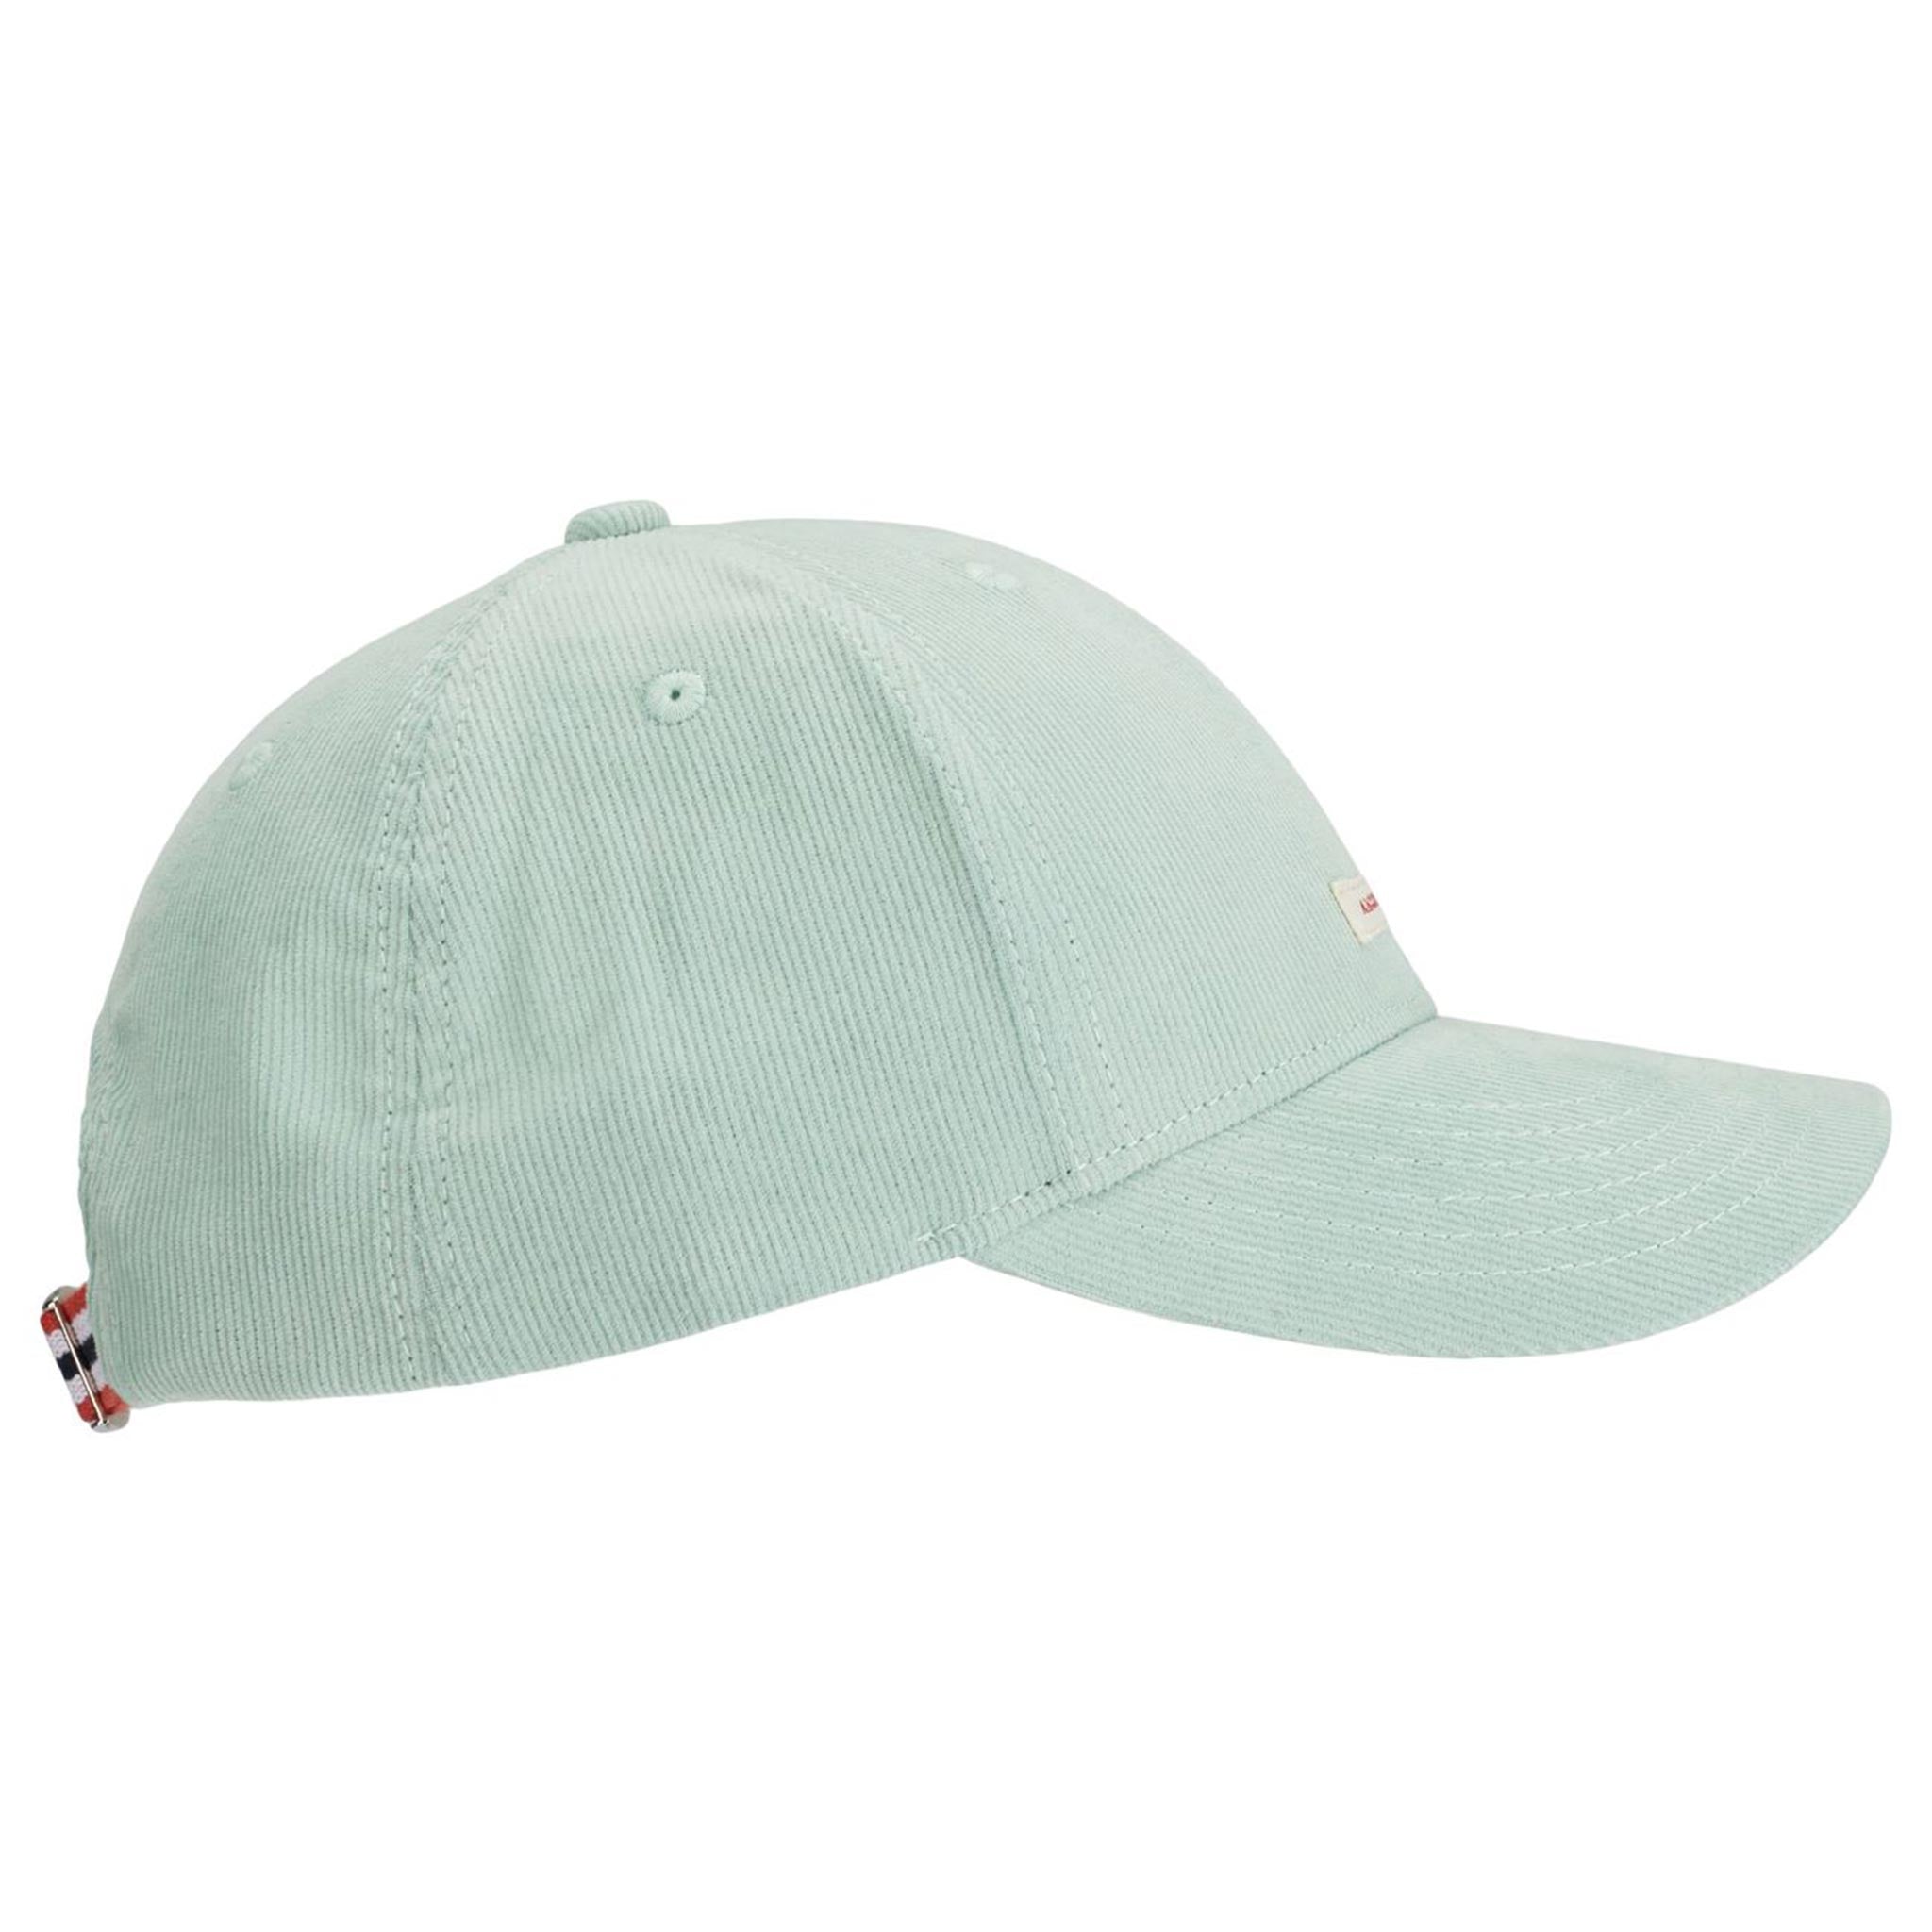 Concord Patch Cap in Grey Mist